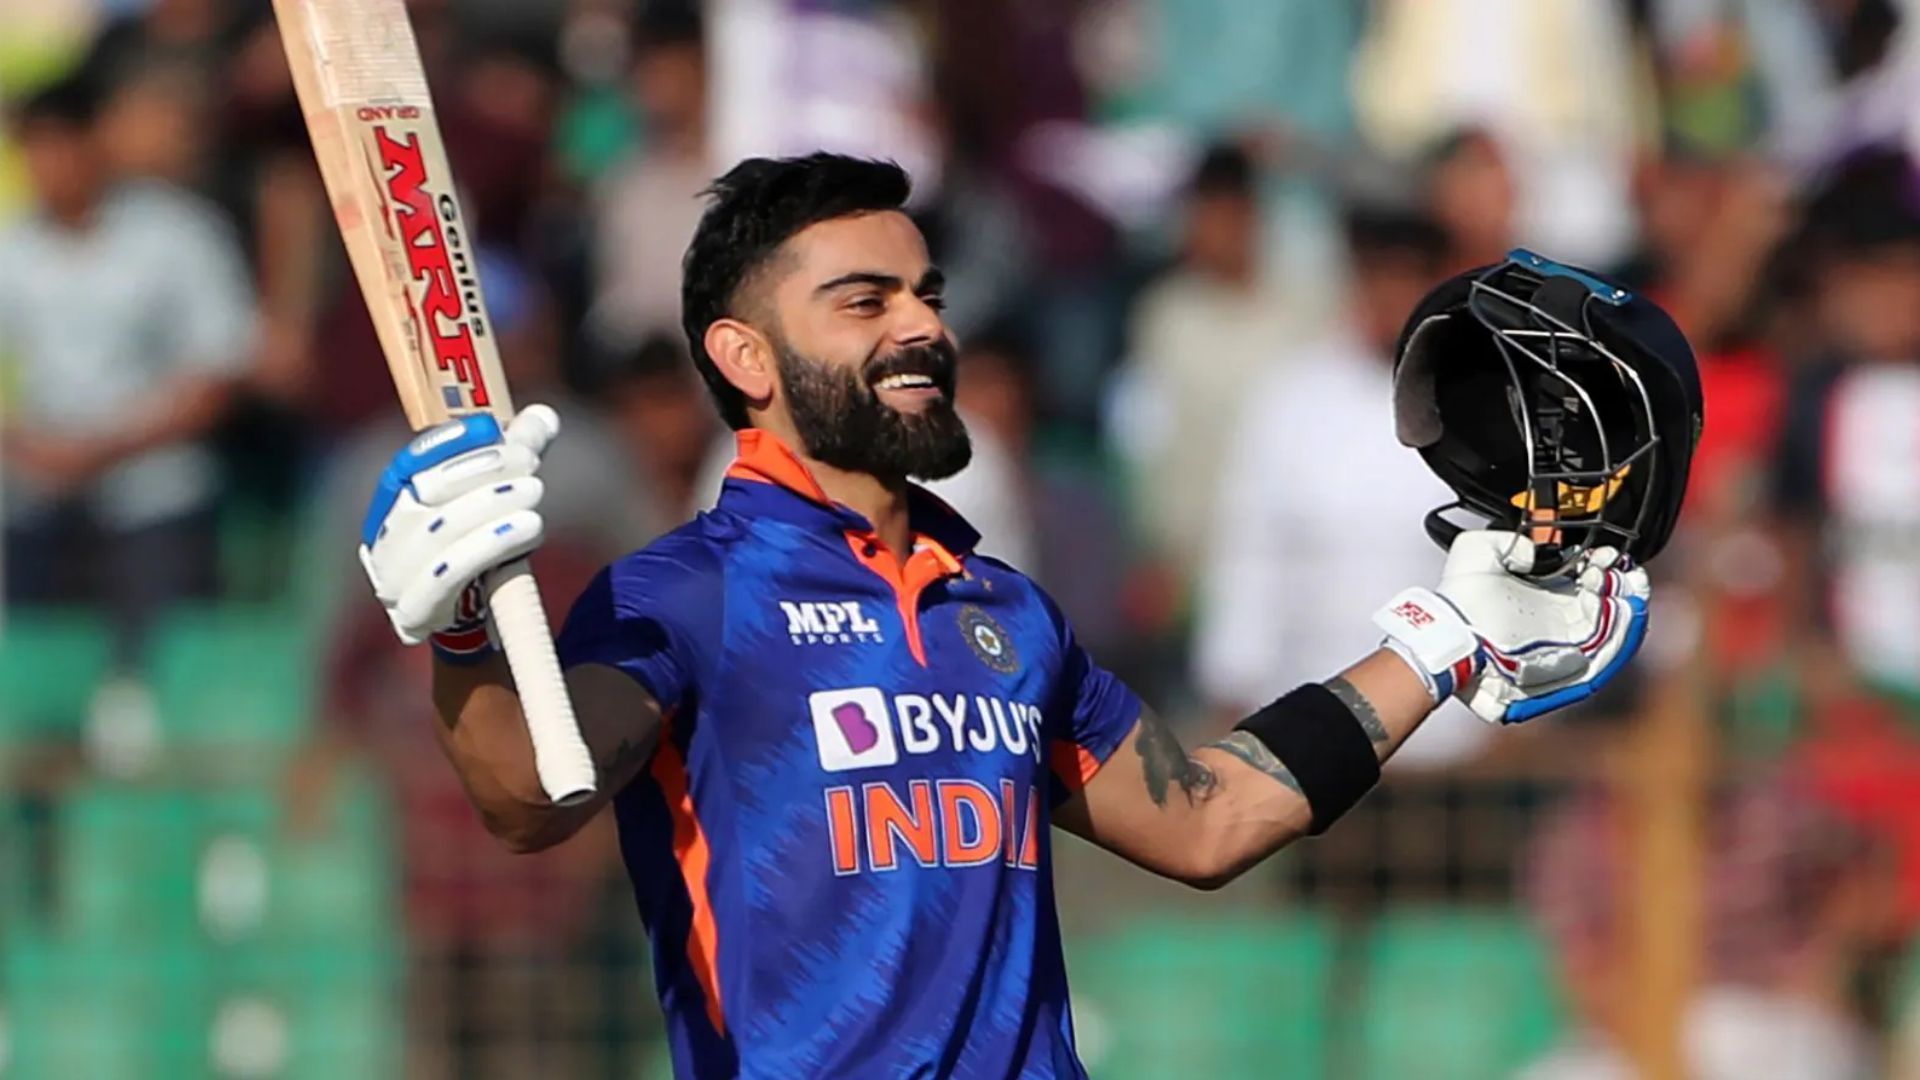 Arjun Saud is in awe of Virat Kohli for the way the latter handles himself off the field (P.C.:X)